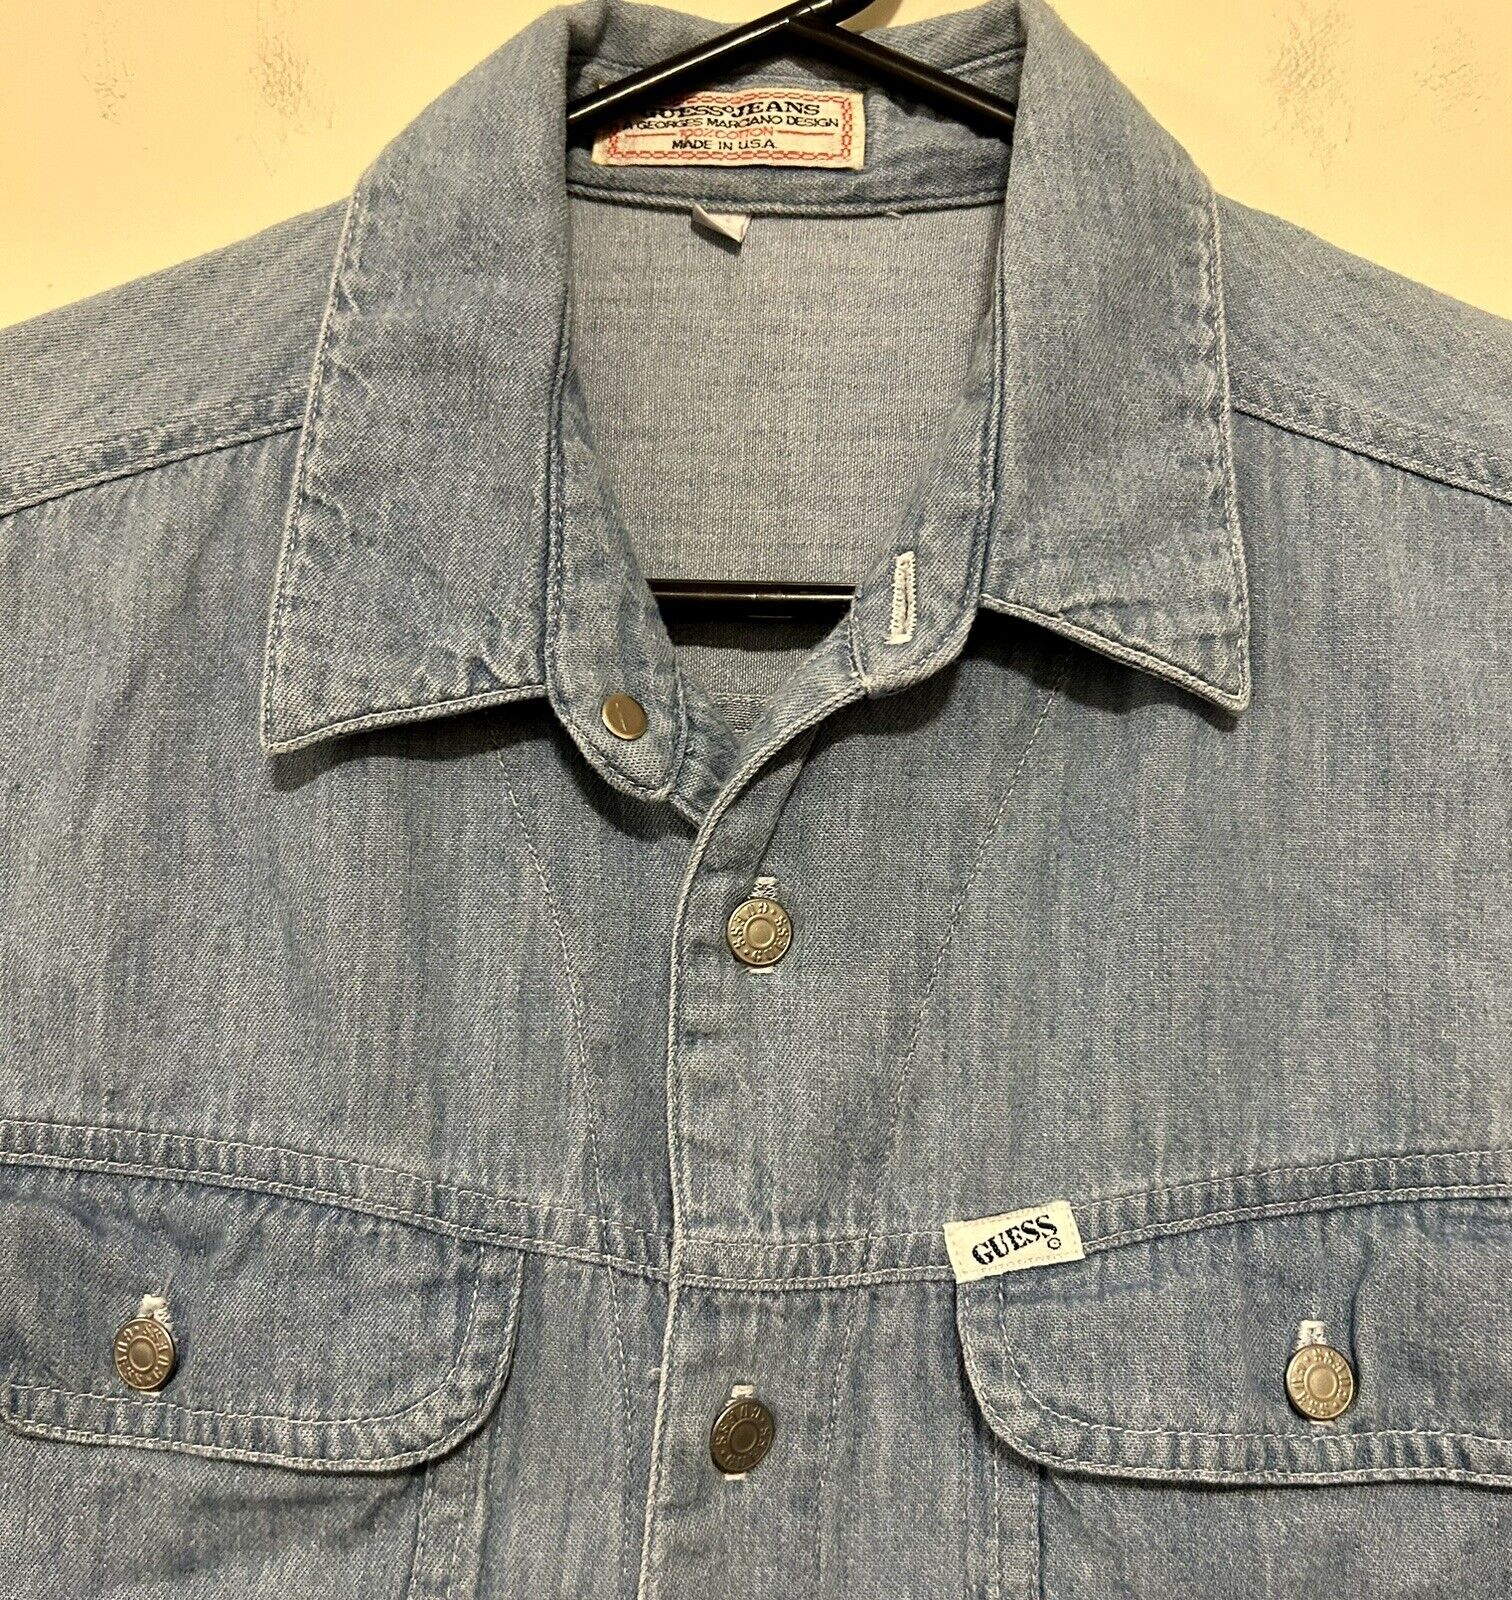 Vtg Guess Georges Marciano Blue Denim Jean Shirt/… - image 3